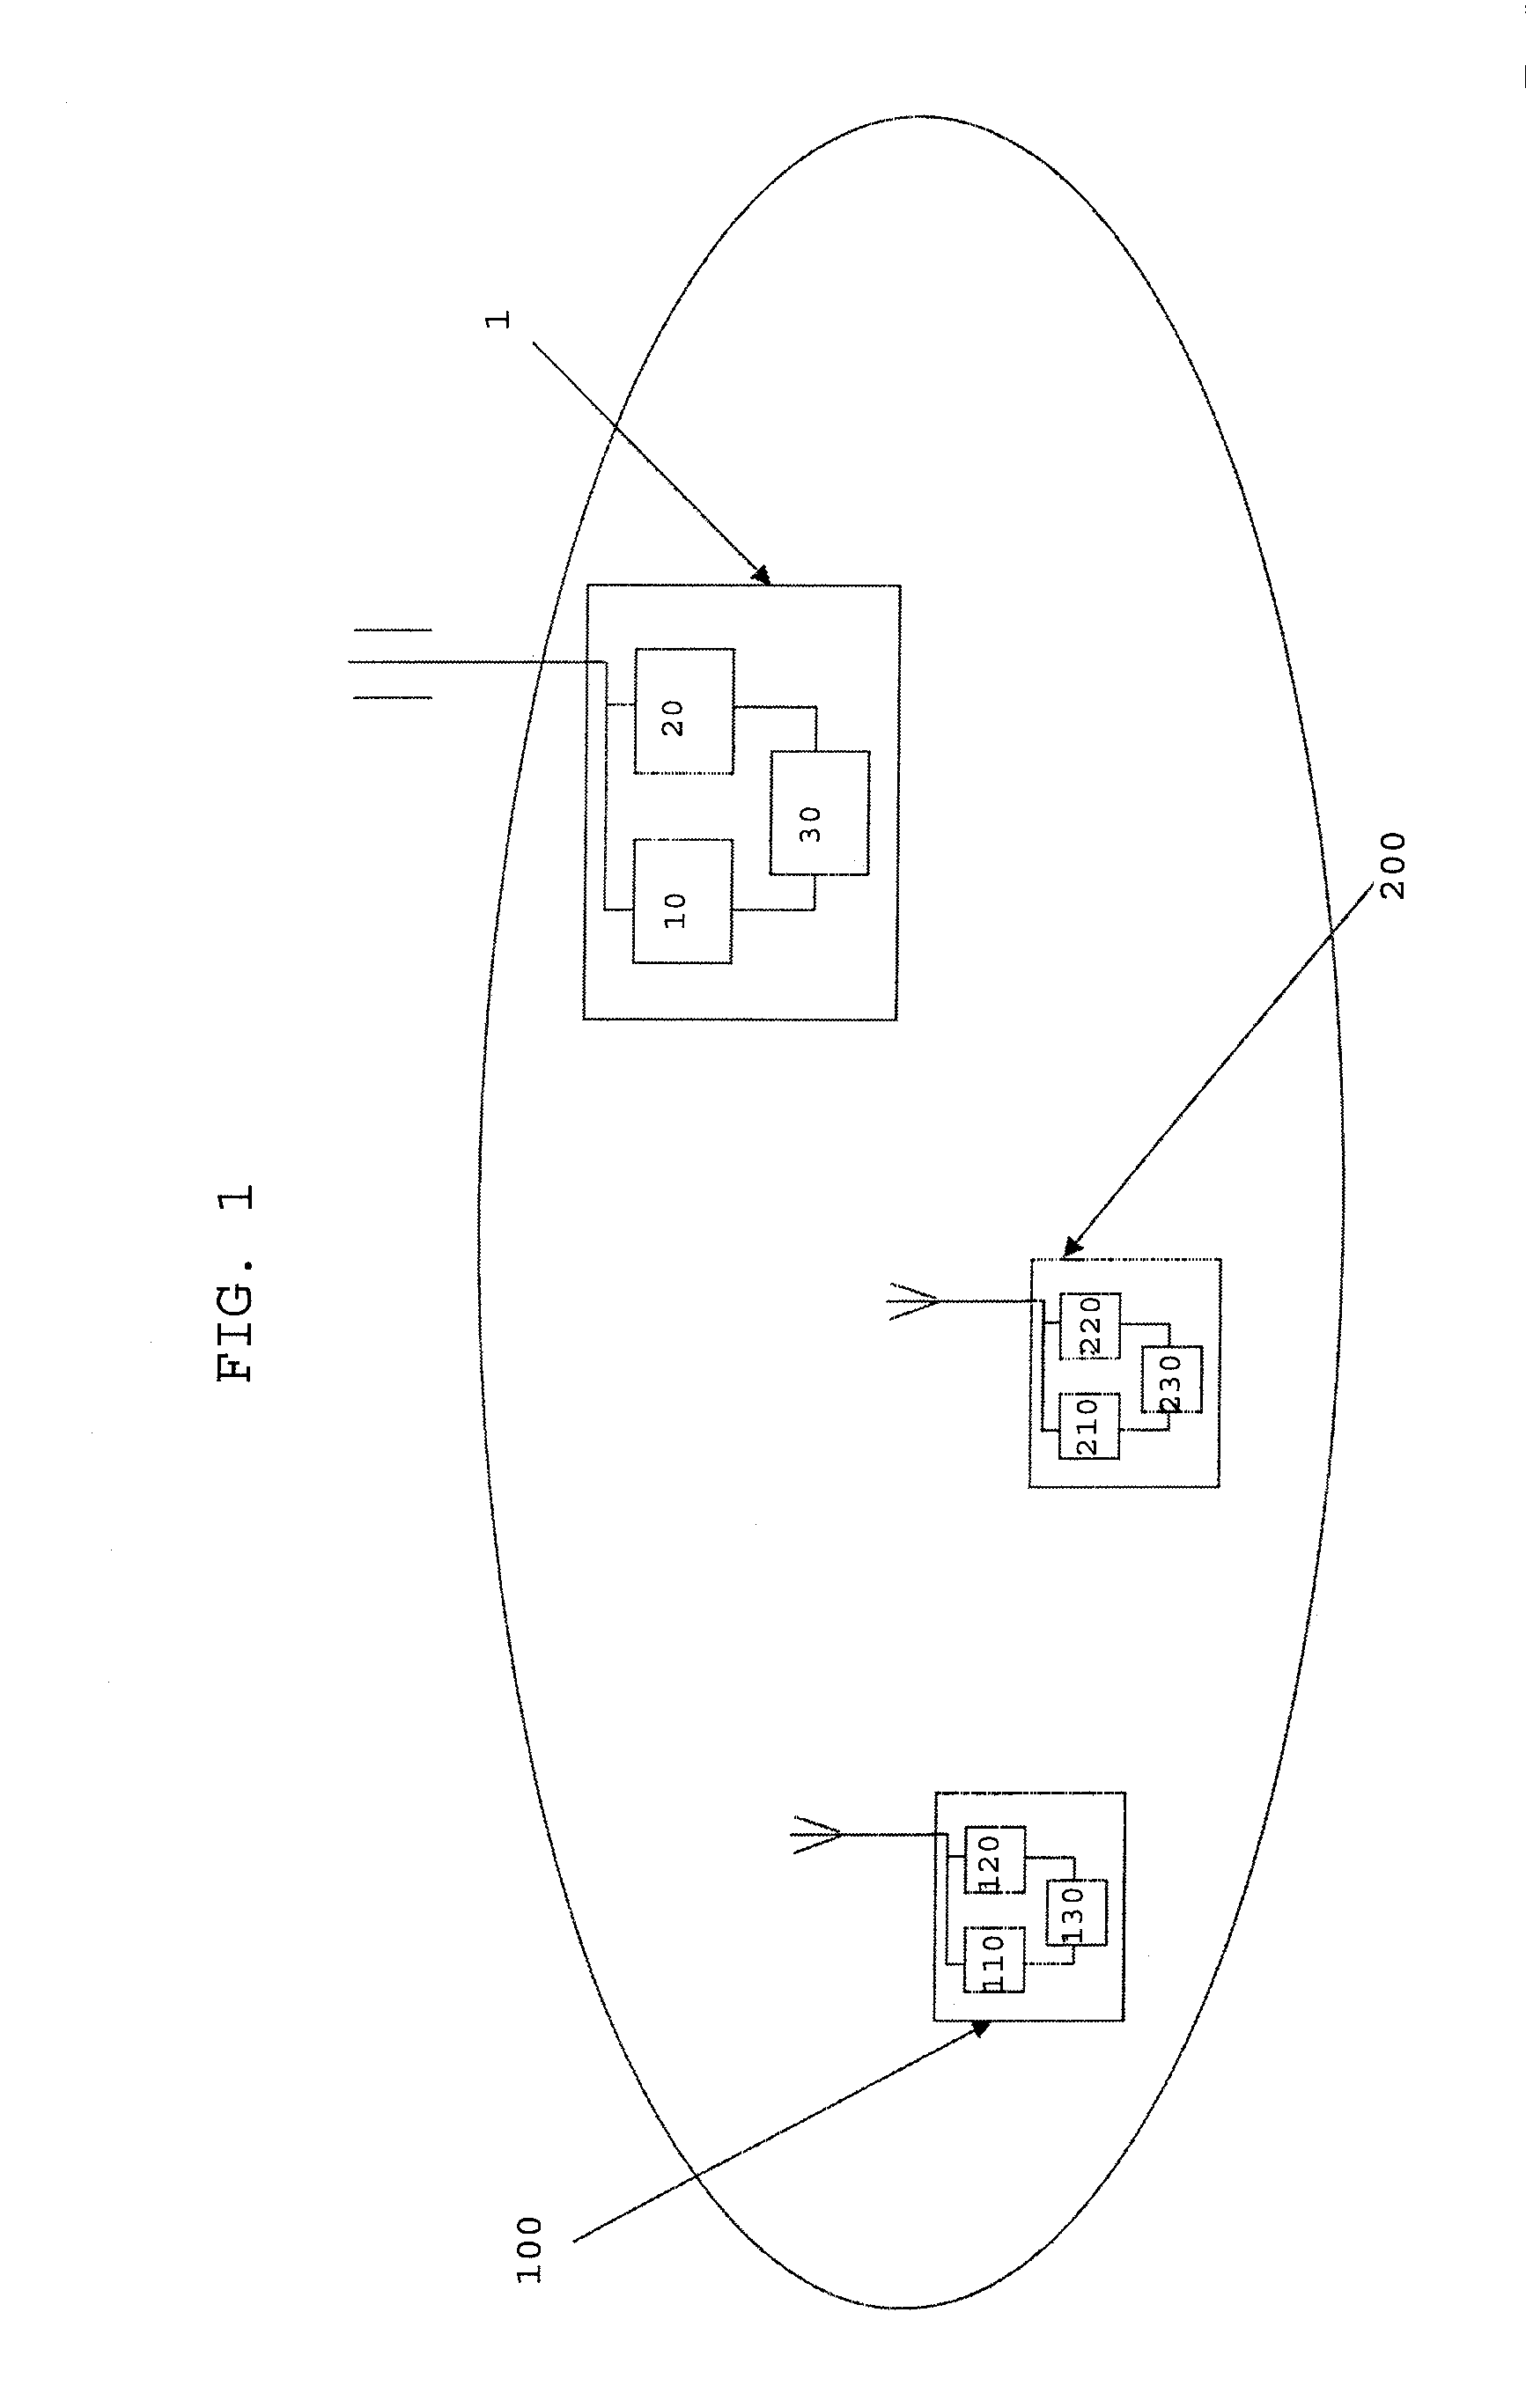 Access to a cellular network for machine type communication devices